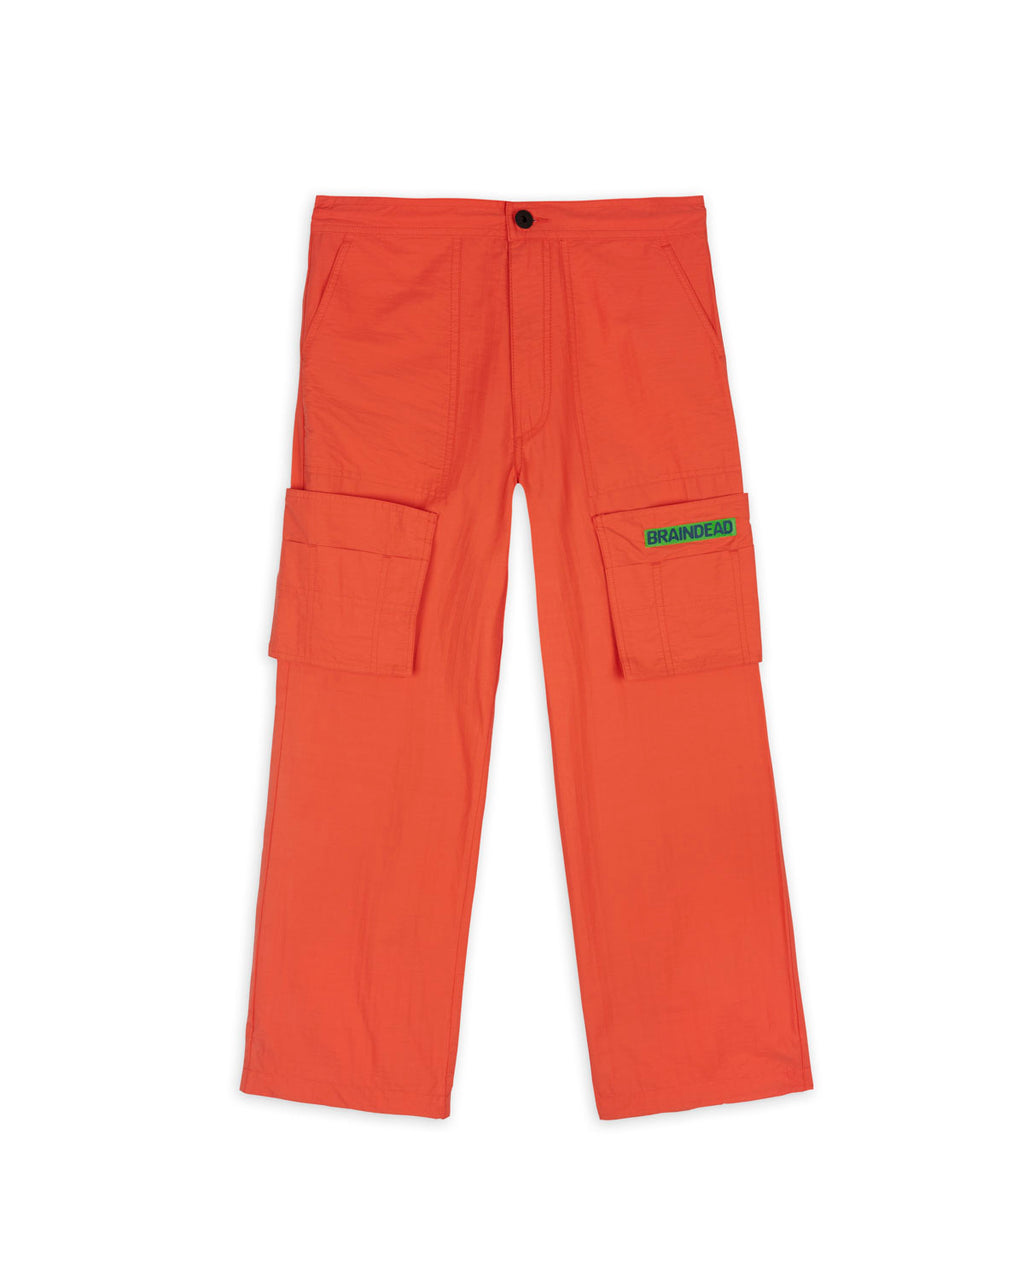 Knife Pleat Run Pant - Red 1